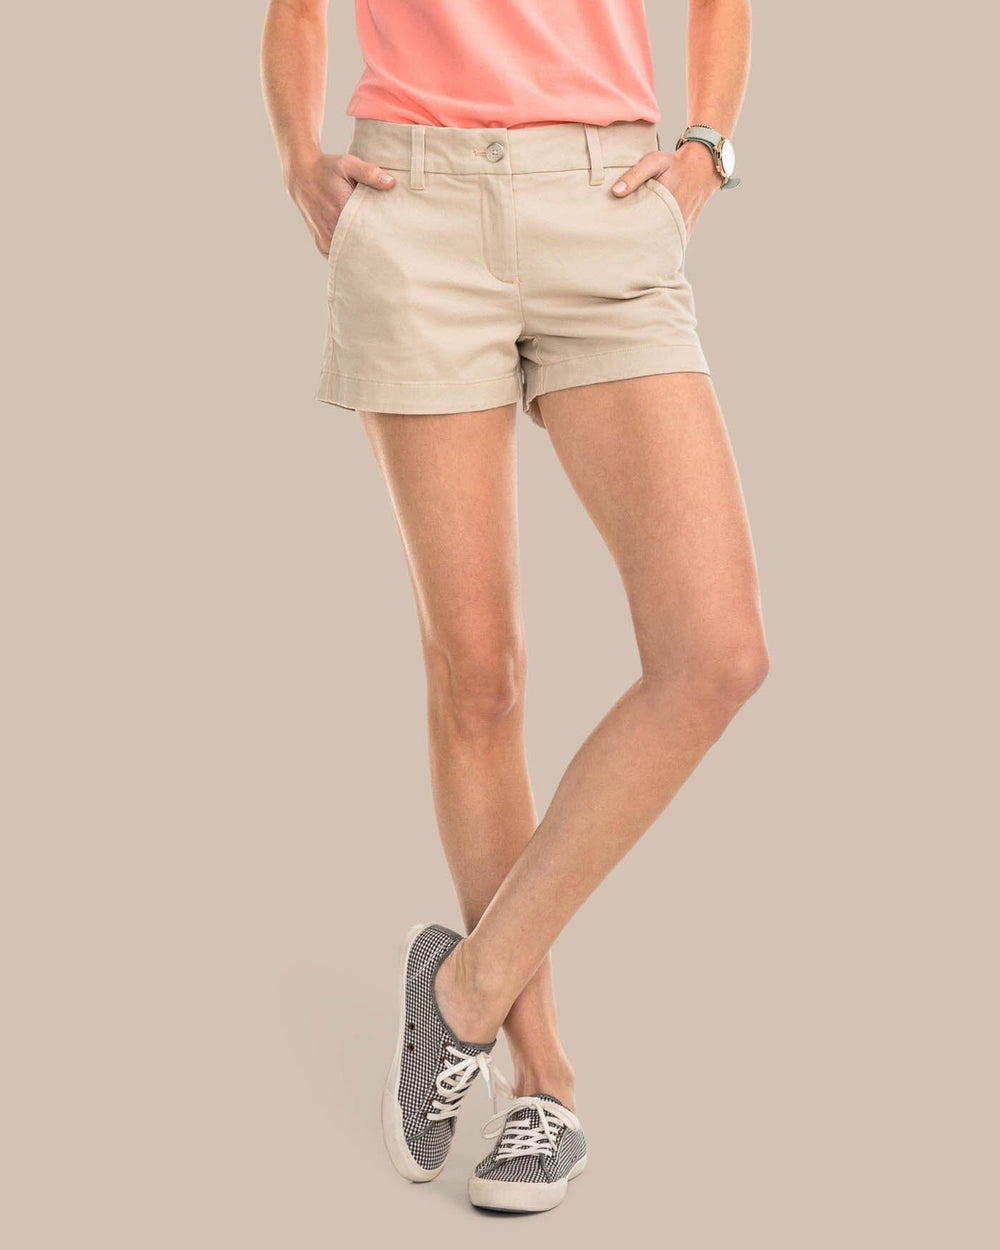 The front view of the Women's Khaki 3 Inch Leah Short by Southern Tide - Driftwood Khaki